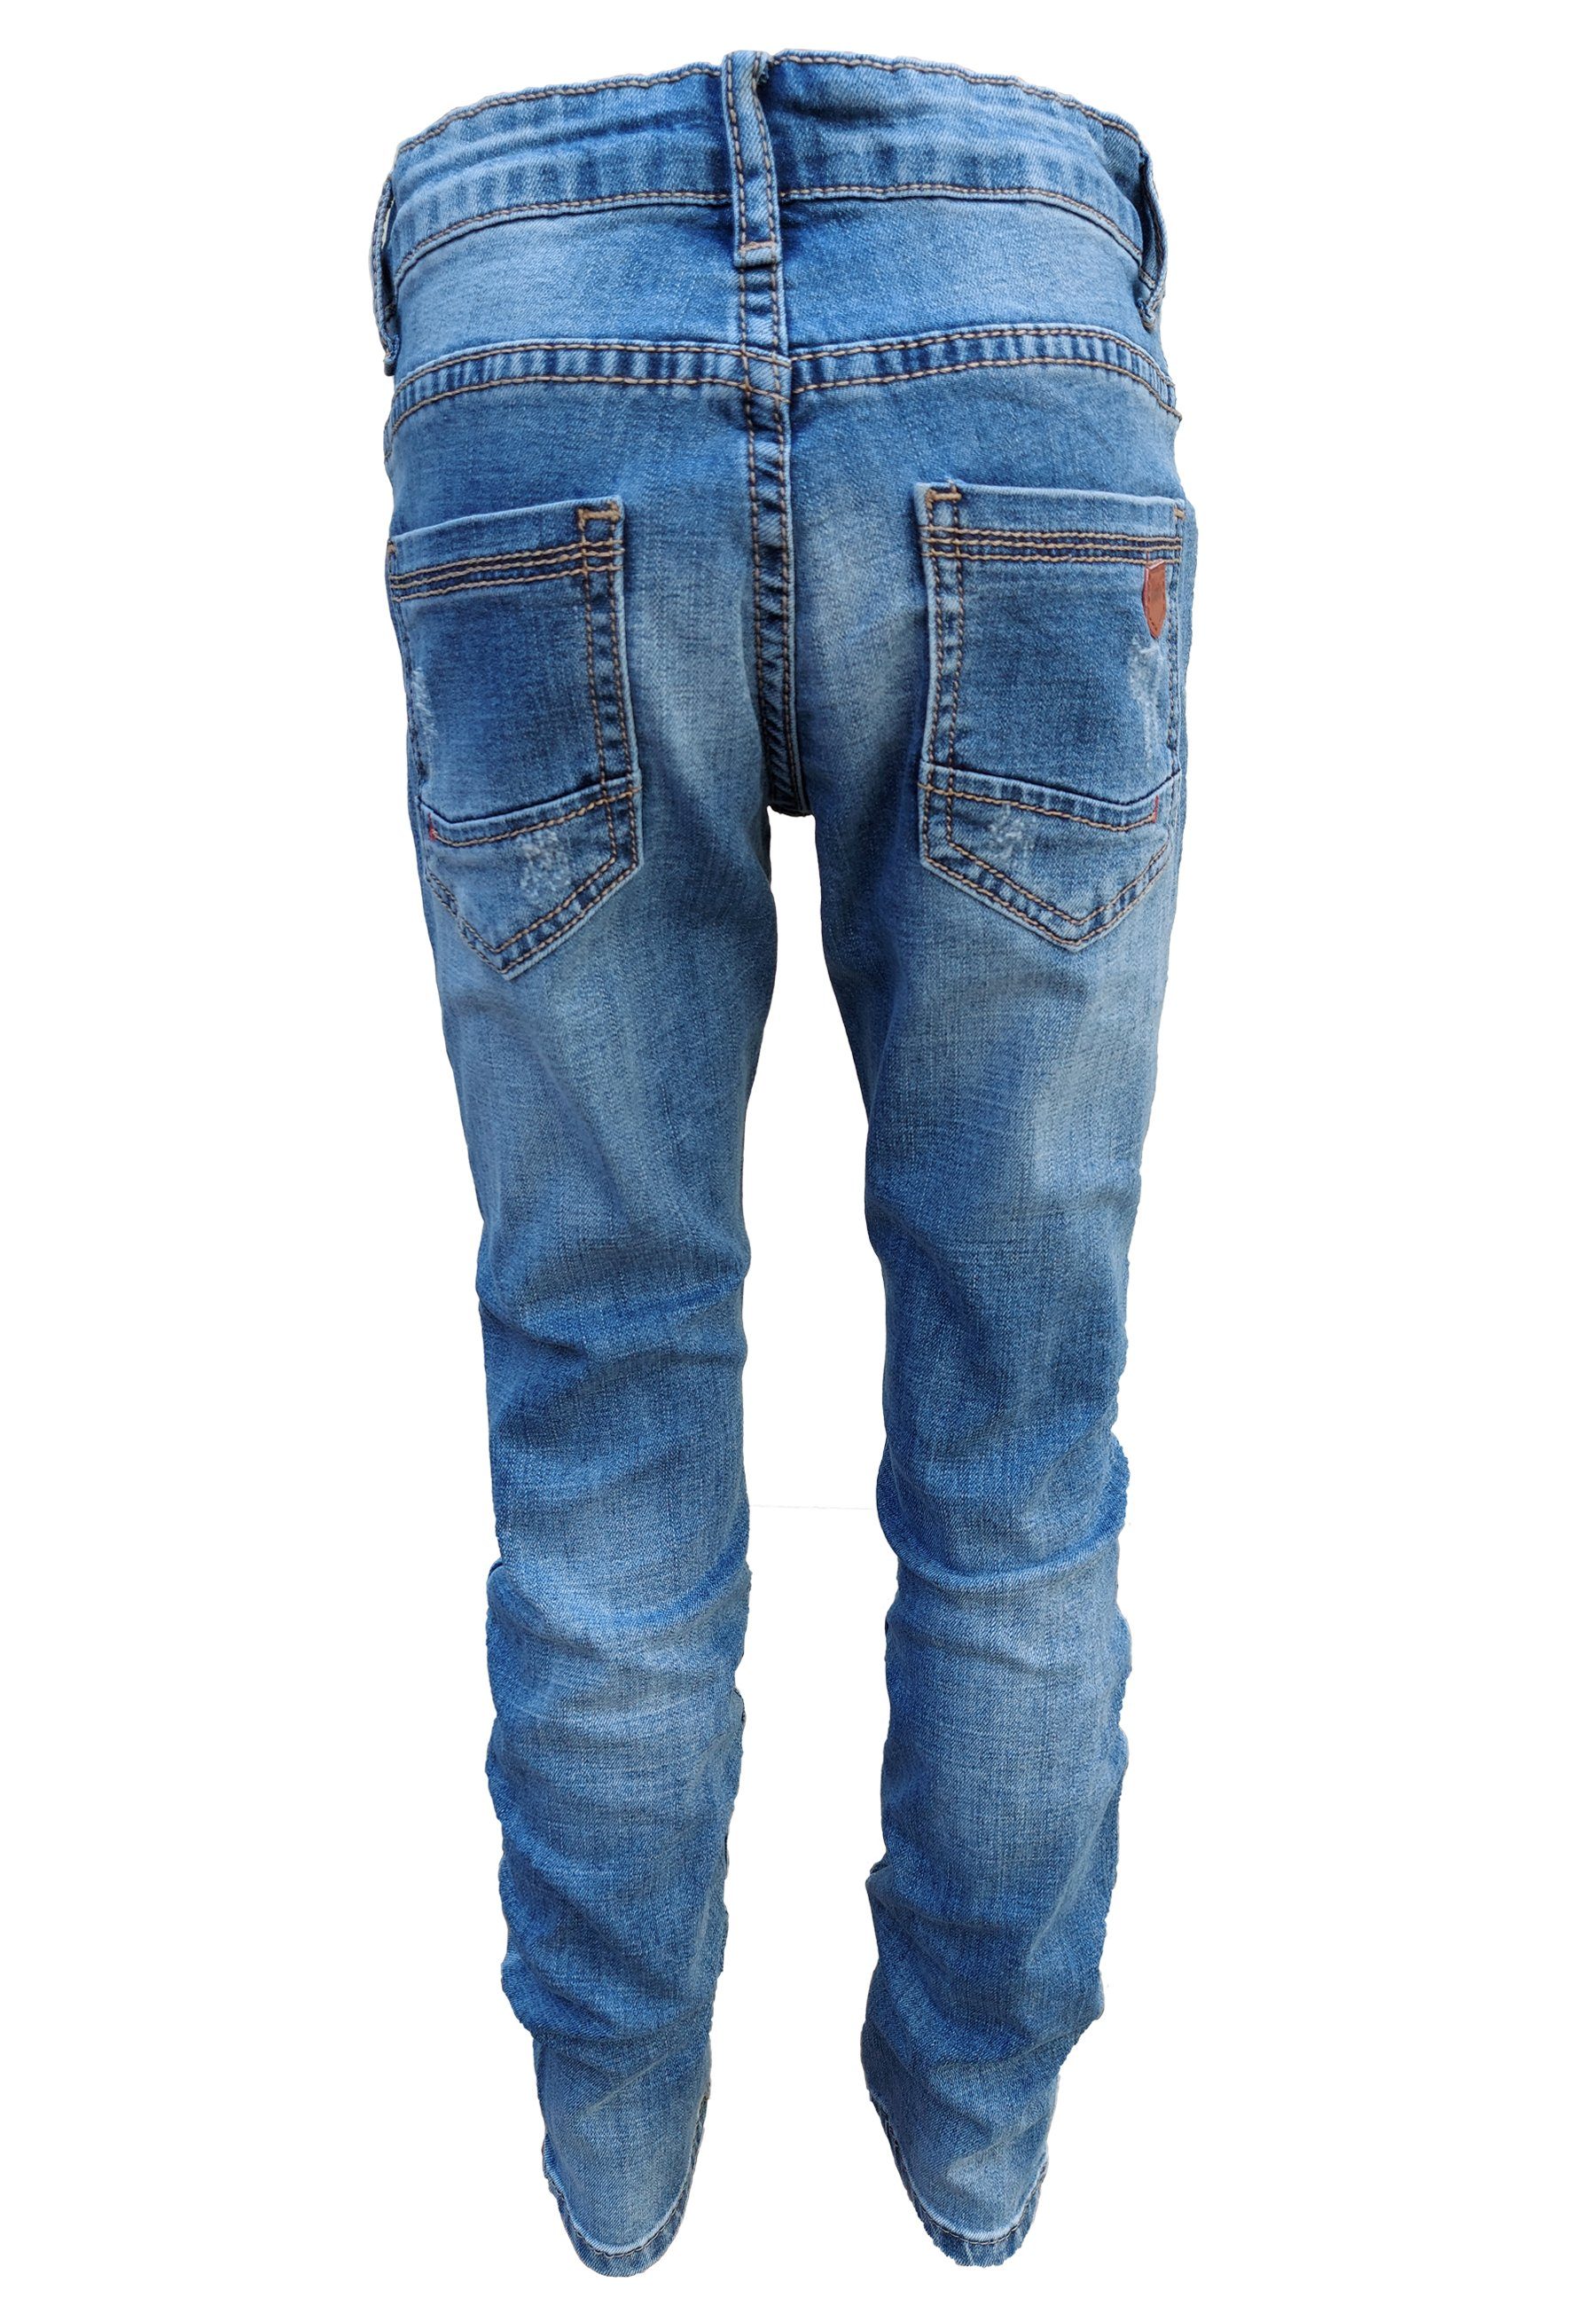 Family Trends Destroyed-Look Bequeme im Jeans